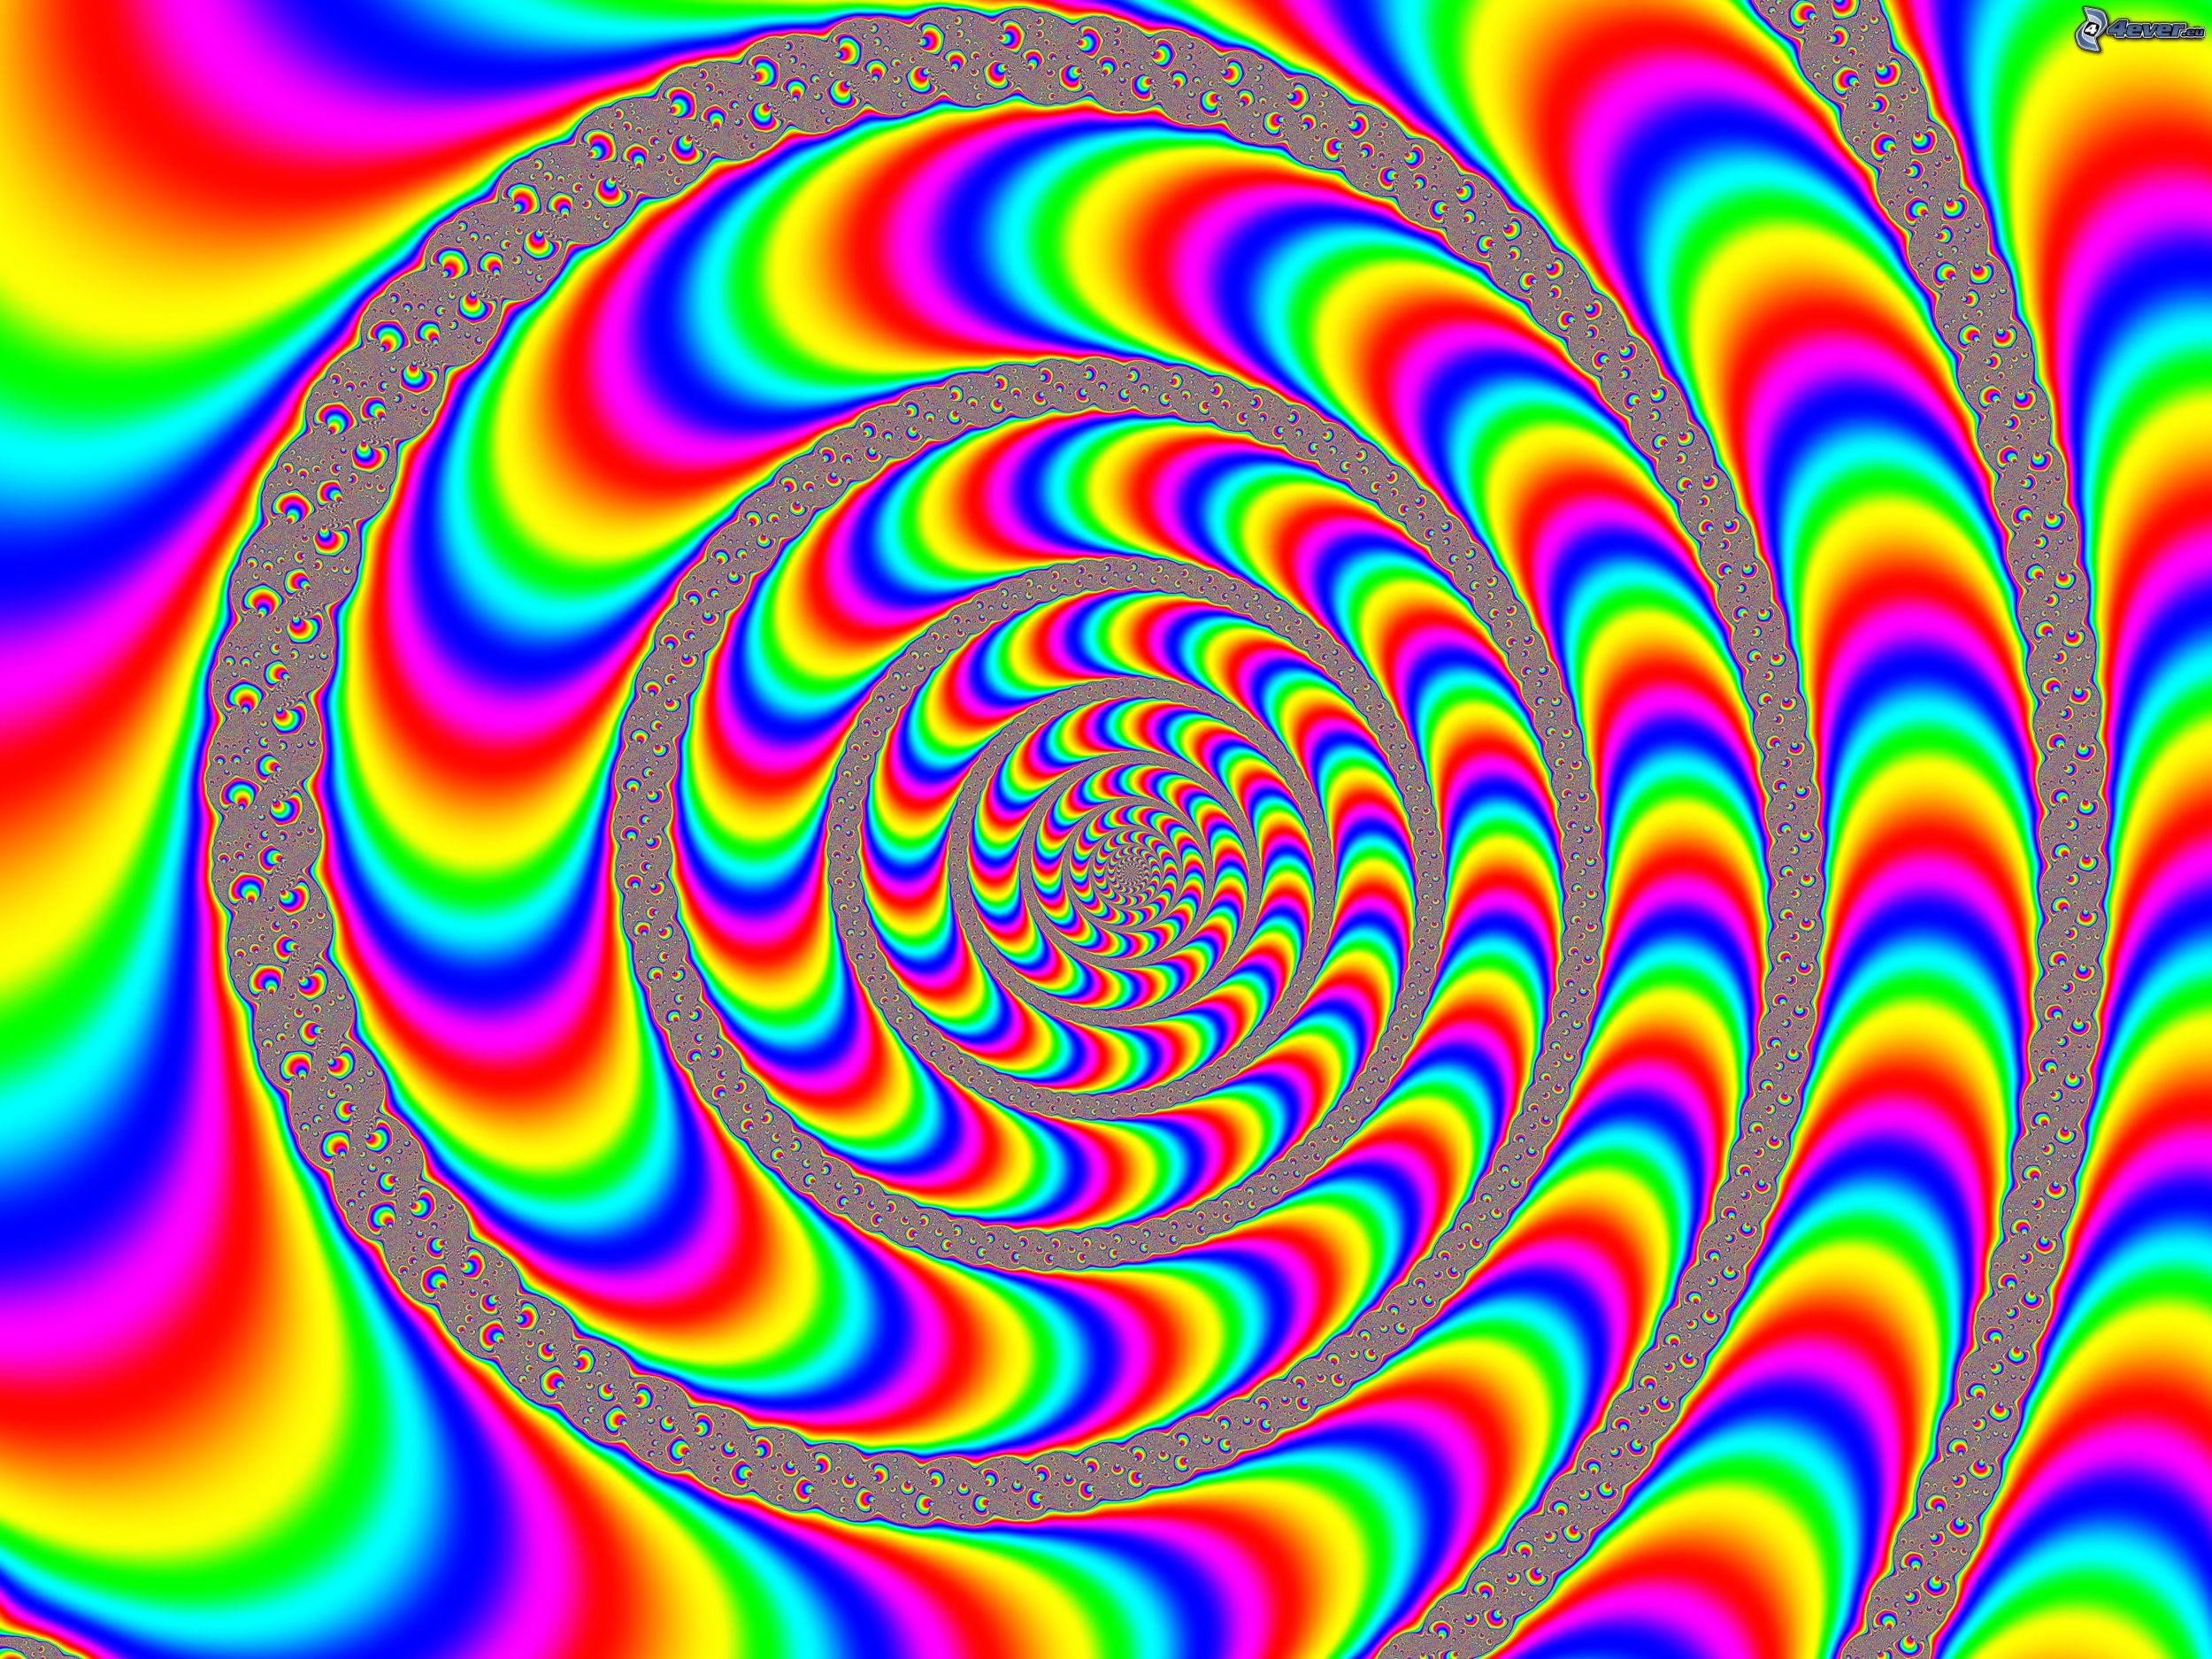 2500x1875 optical illusion, spiral x 1875 px] - Abstract - Pictures and wallpapers